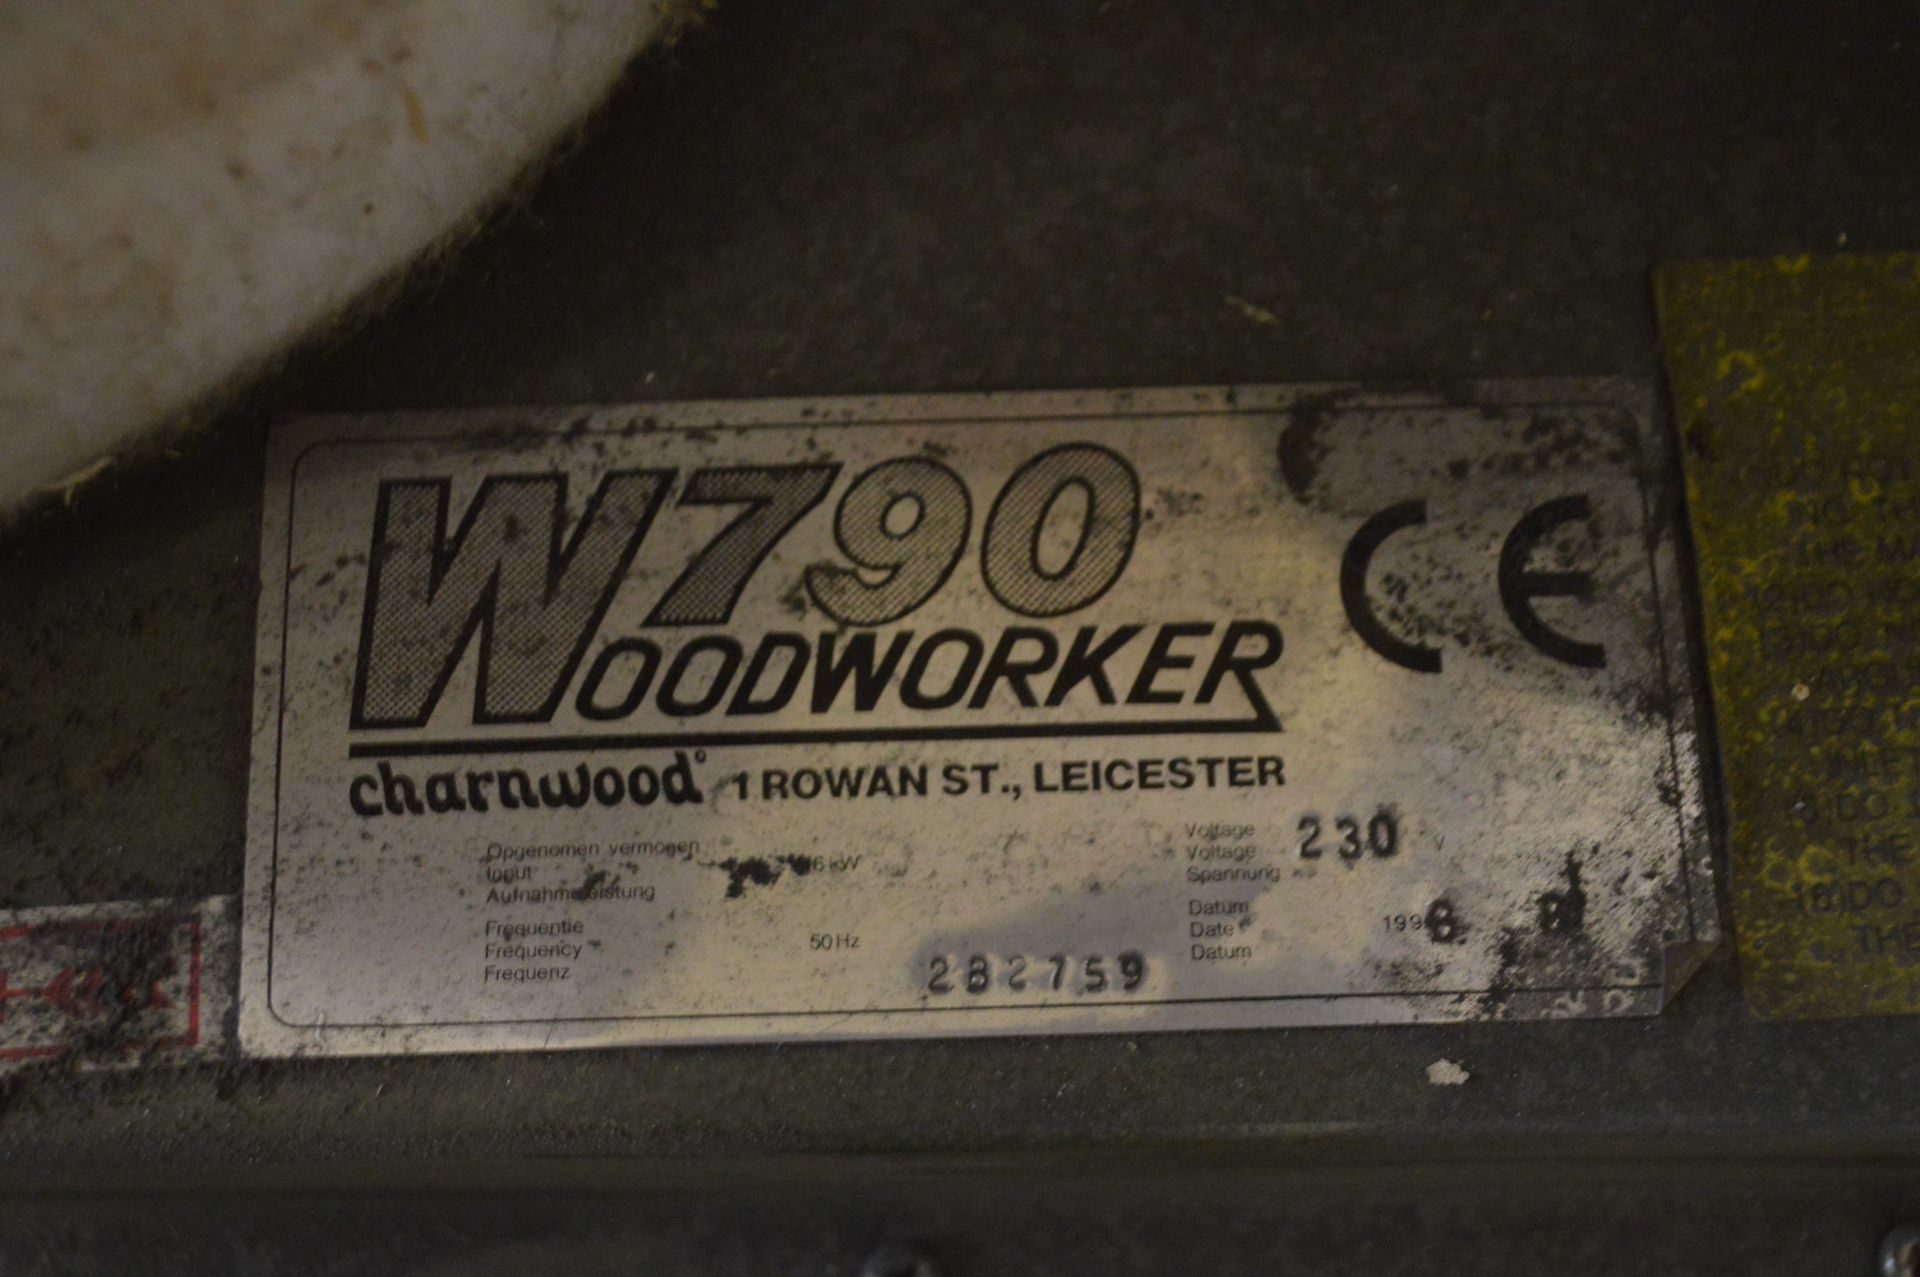 Charnwood W790 Woodworker Single Bag Dust Collecto - Image 6 of 6